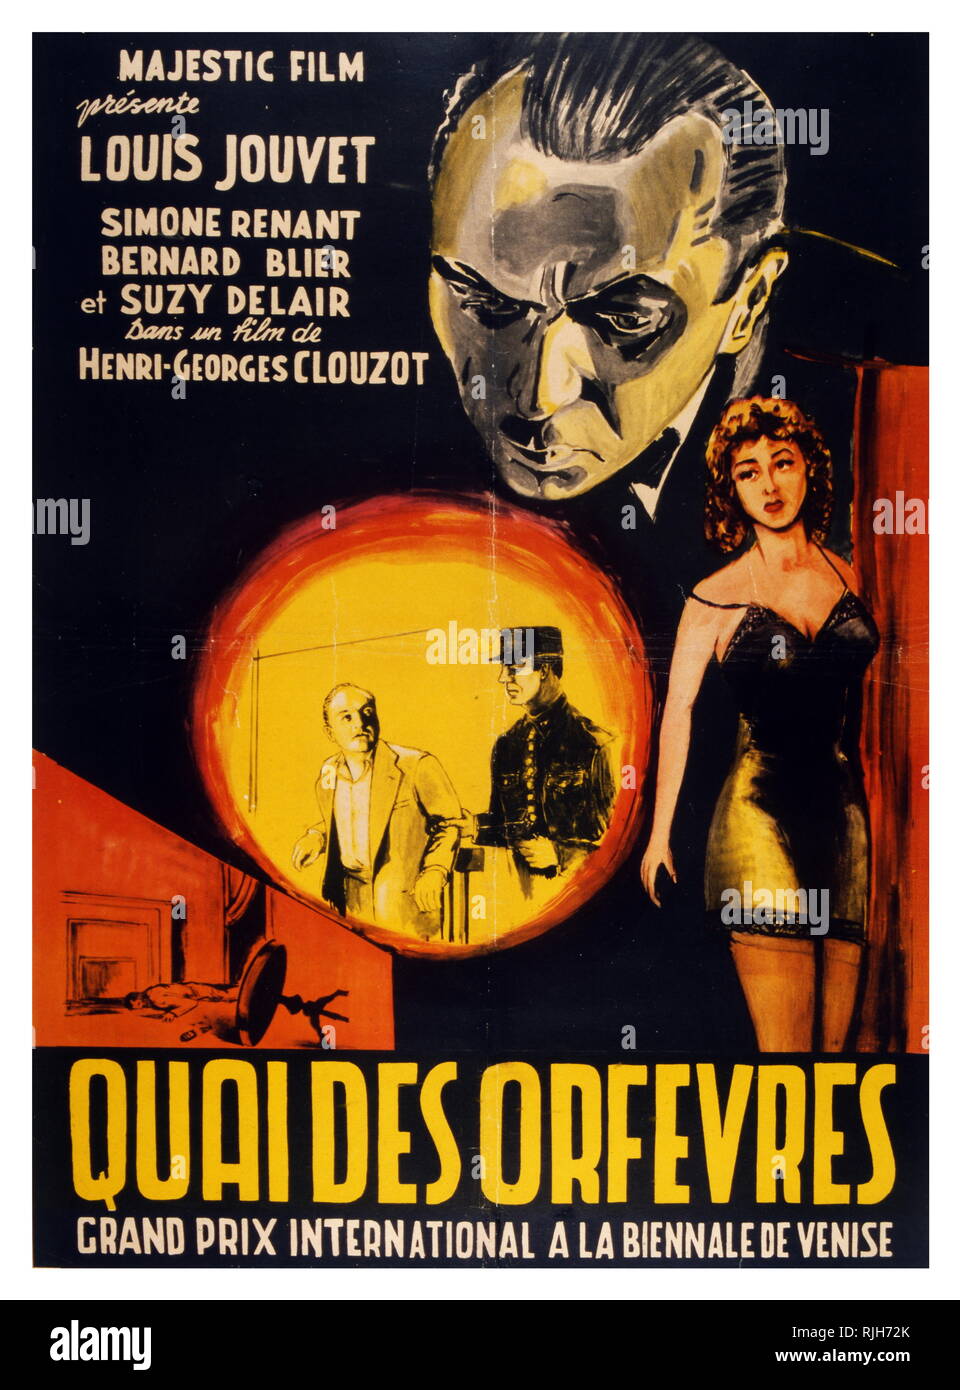 French film poster for the film 'Quai des Orfevres' (also known as Jenny Lamour) 1947 French police drama based on the book Legitime defense by Stanislas-Andre Steeman. Directed by Henri-Georges Clouzot the film stars Suzy Delair as Jenny Lamour, Bernard Blier as Maurice Martineau, Louis Jouvet as Inspector Antoine and Simone Renant as Dora. Stock Photo